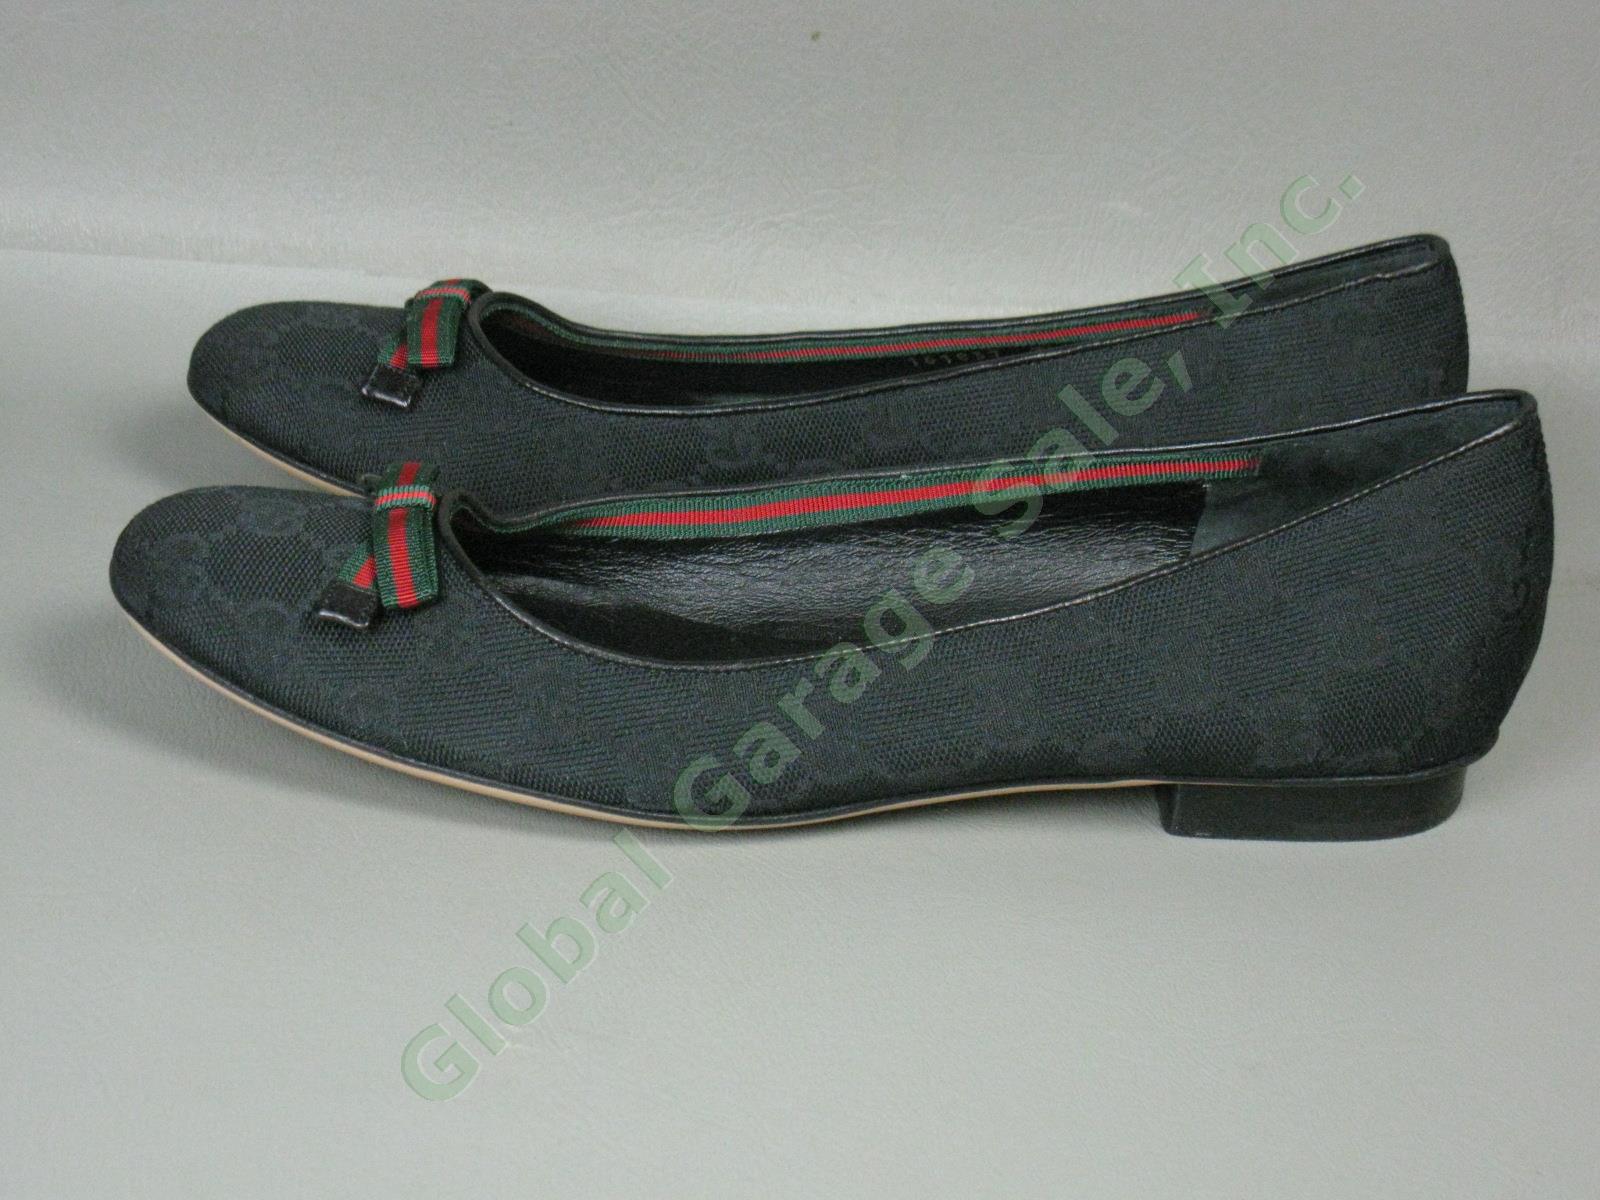 Womens Gucci Moca Tess S Cuoio Flats Size 7.5 Black One Owner With Box 161837 NR 4